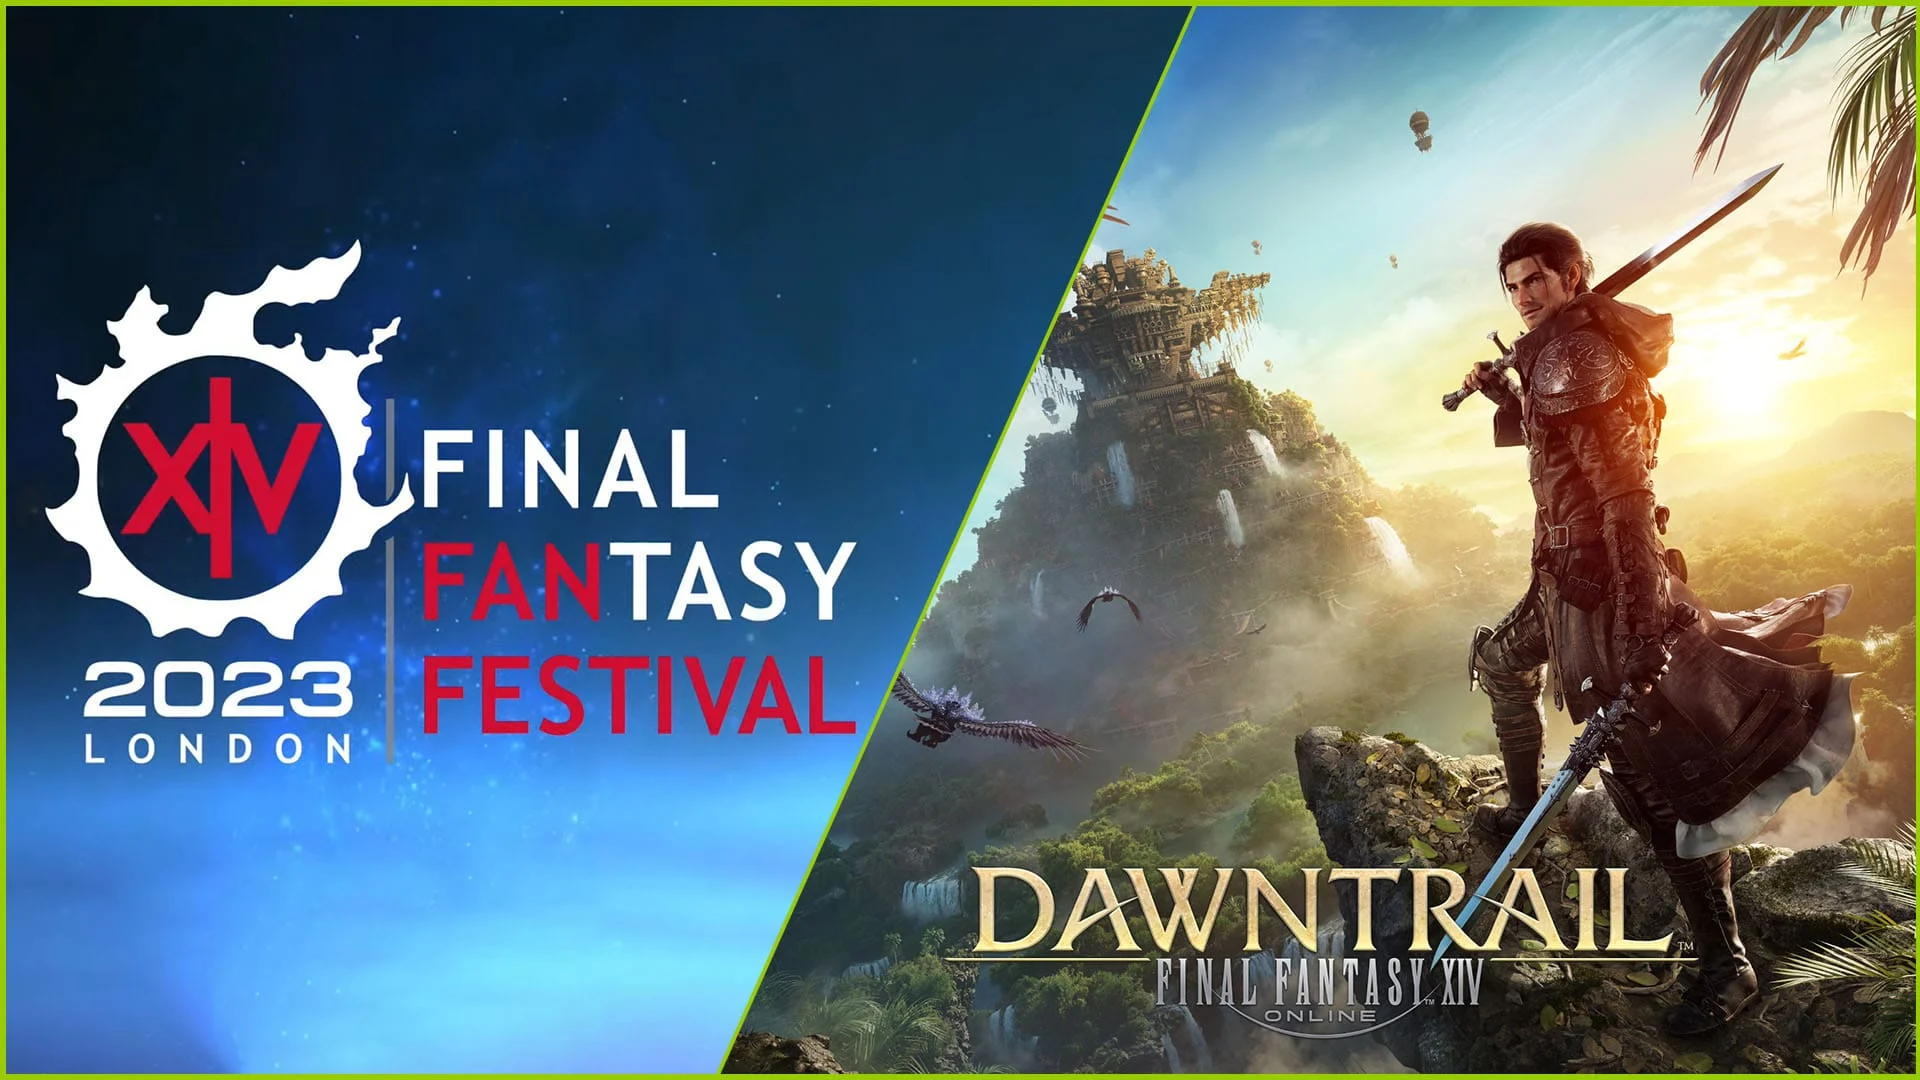 What will be shown at the major London fan festival for the MMORPG Final Fantasy XIV — Fan Festival 2023